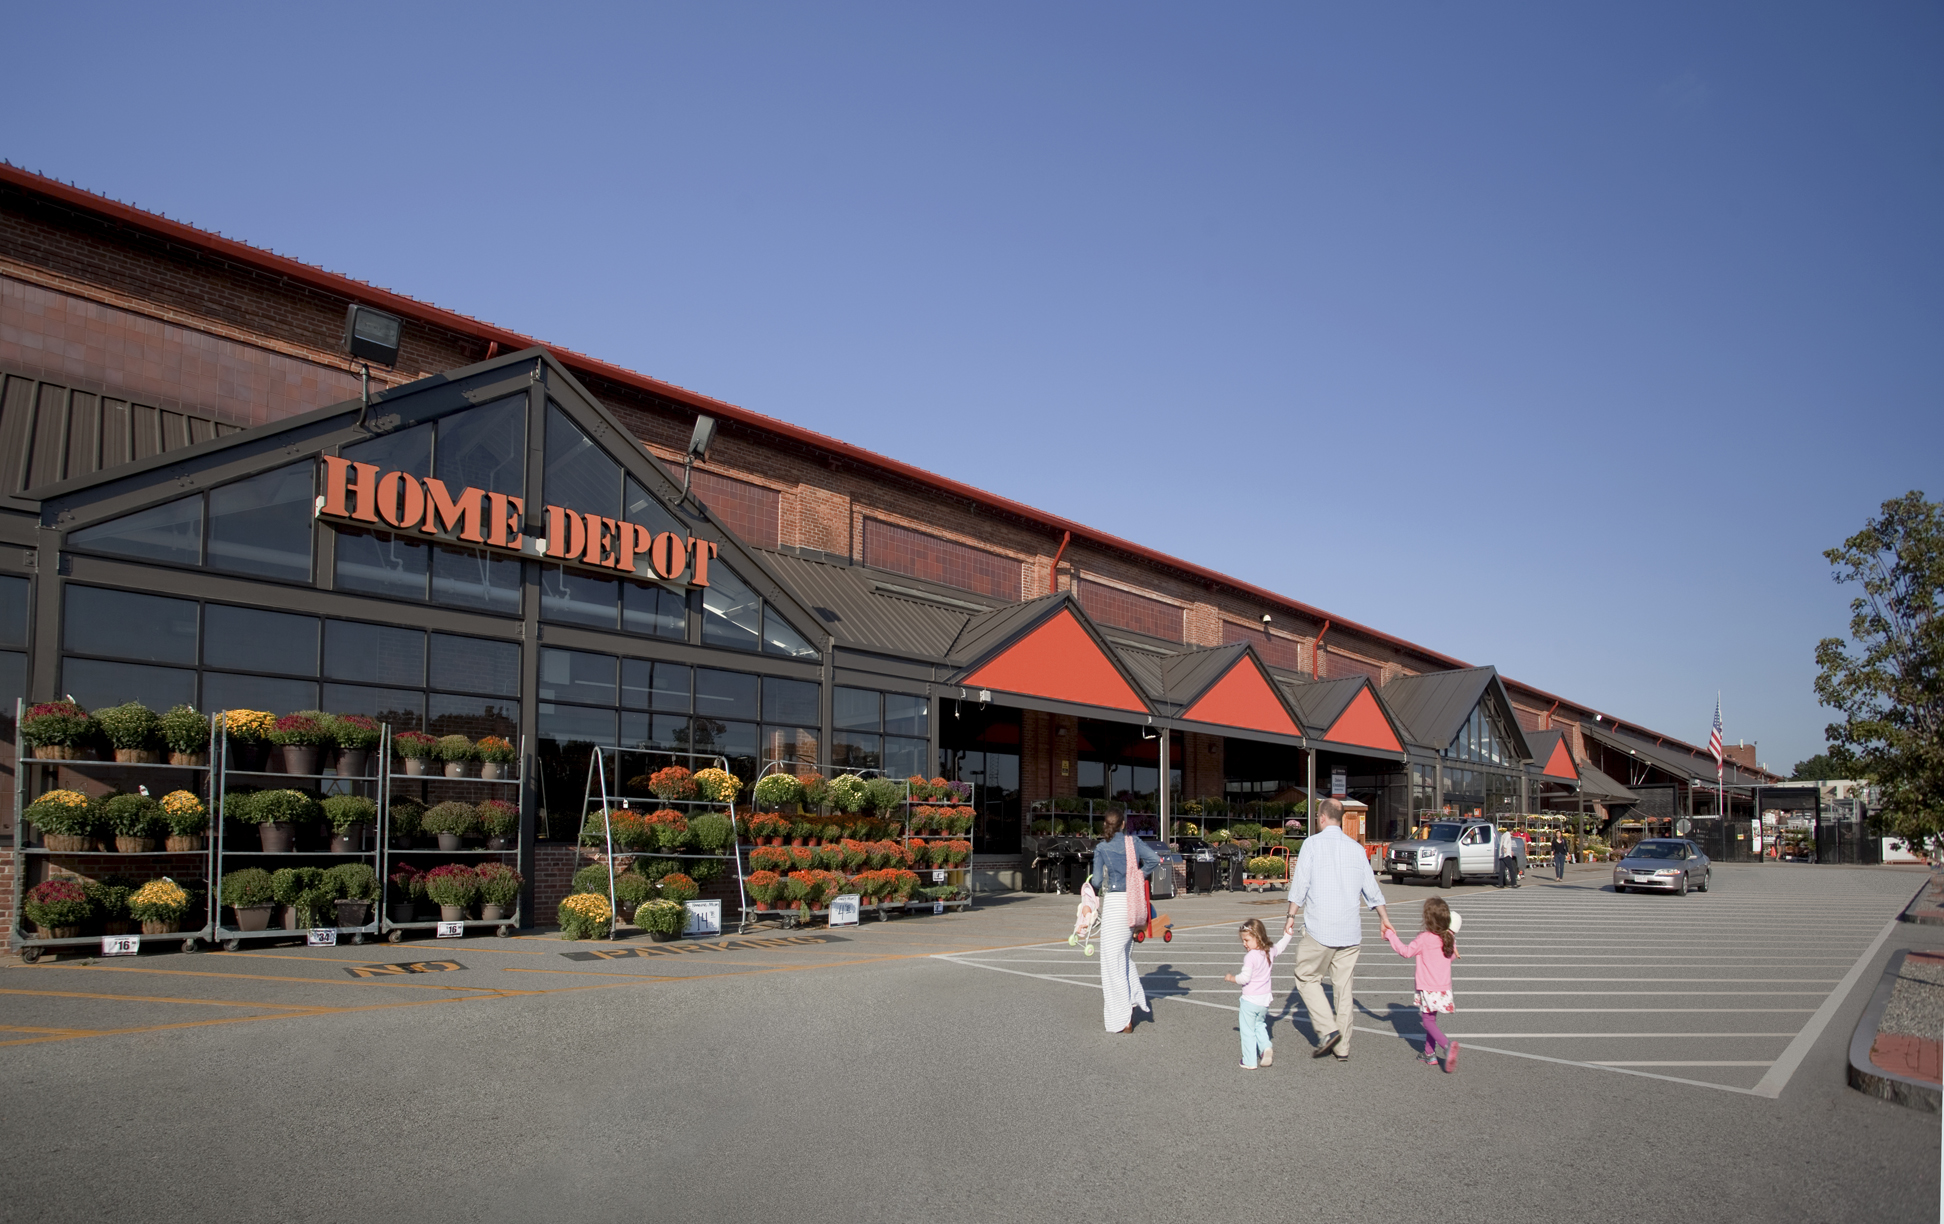 Inland Private Sells Two Home Depot Stores in Latest DST Full-Cycle Transaction